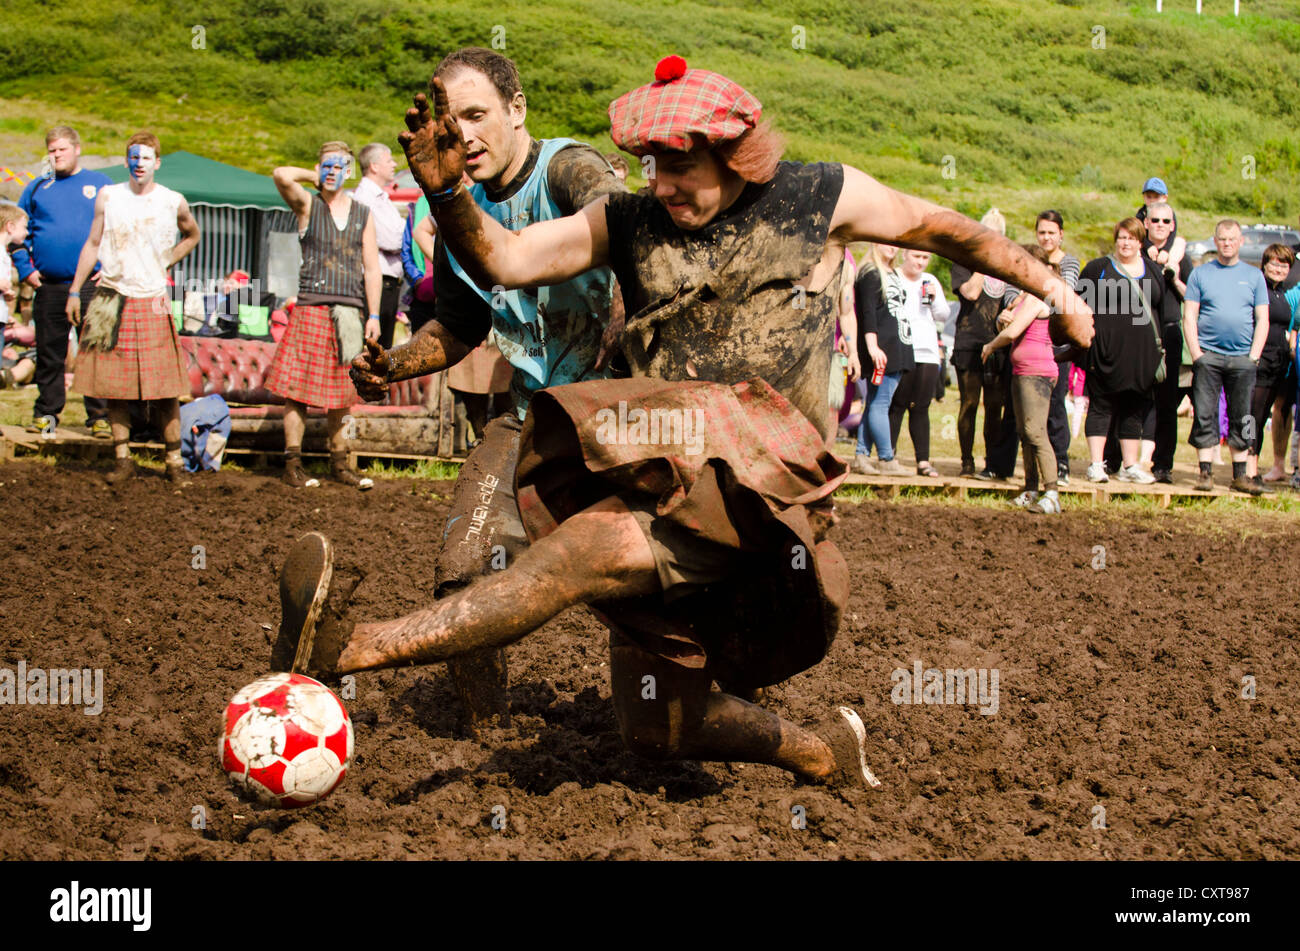 Young people playing mud-soccer, European championship, town of Isafjordur, West Fjords, Iceland, Europe Stock Photo